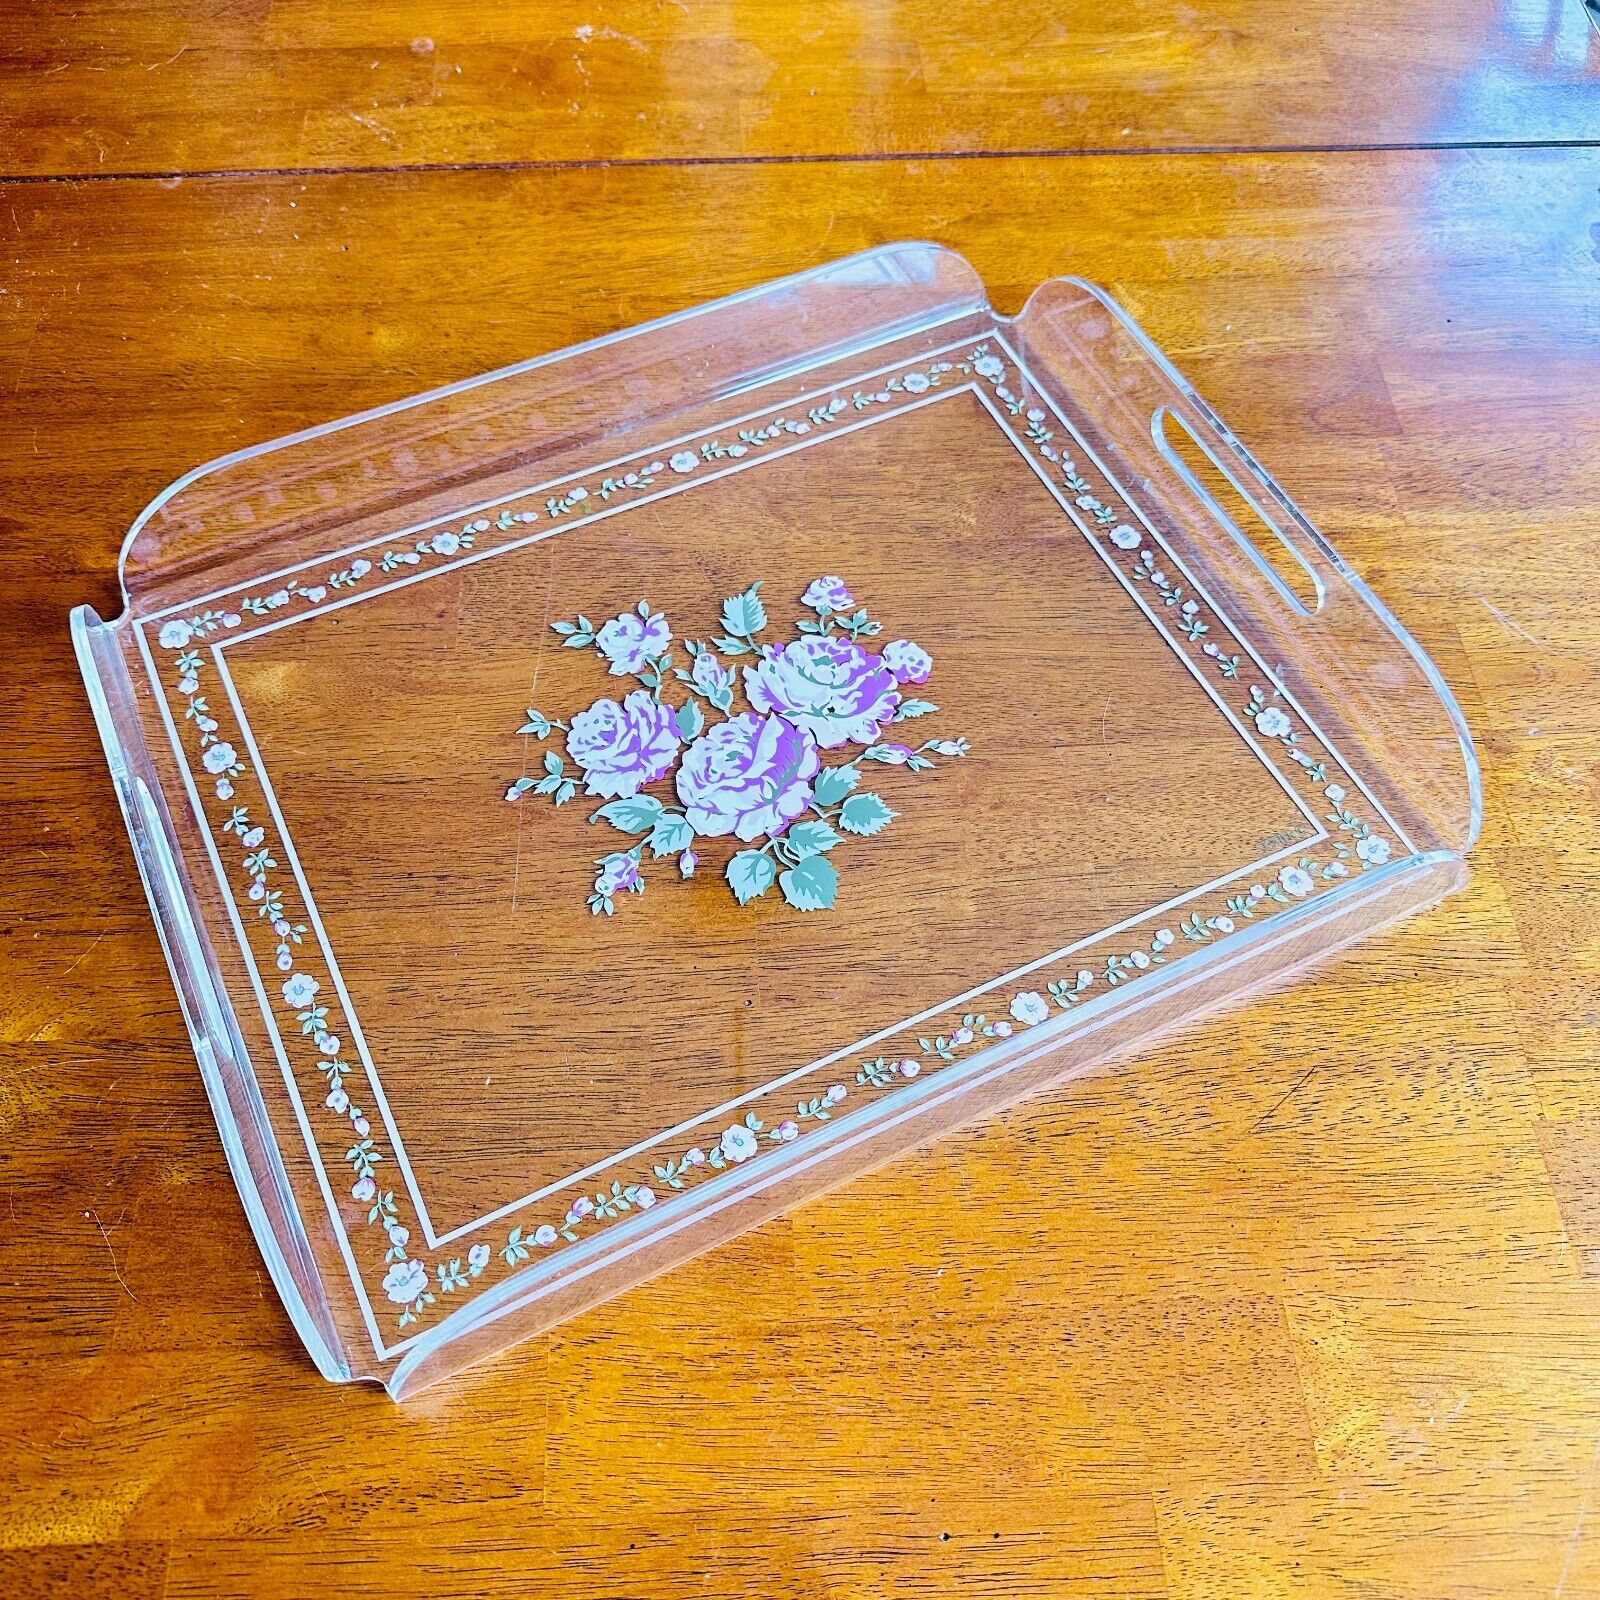 vtg lucite tray w handles floral mcm shabby chic